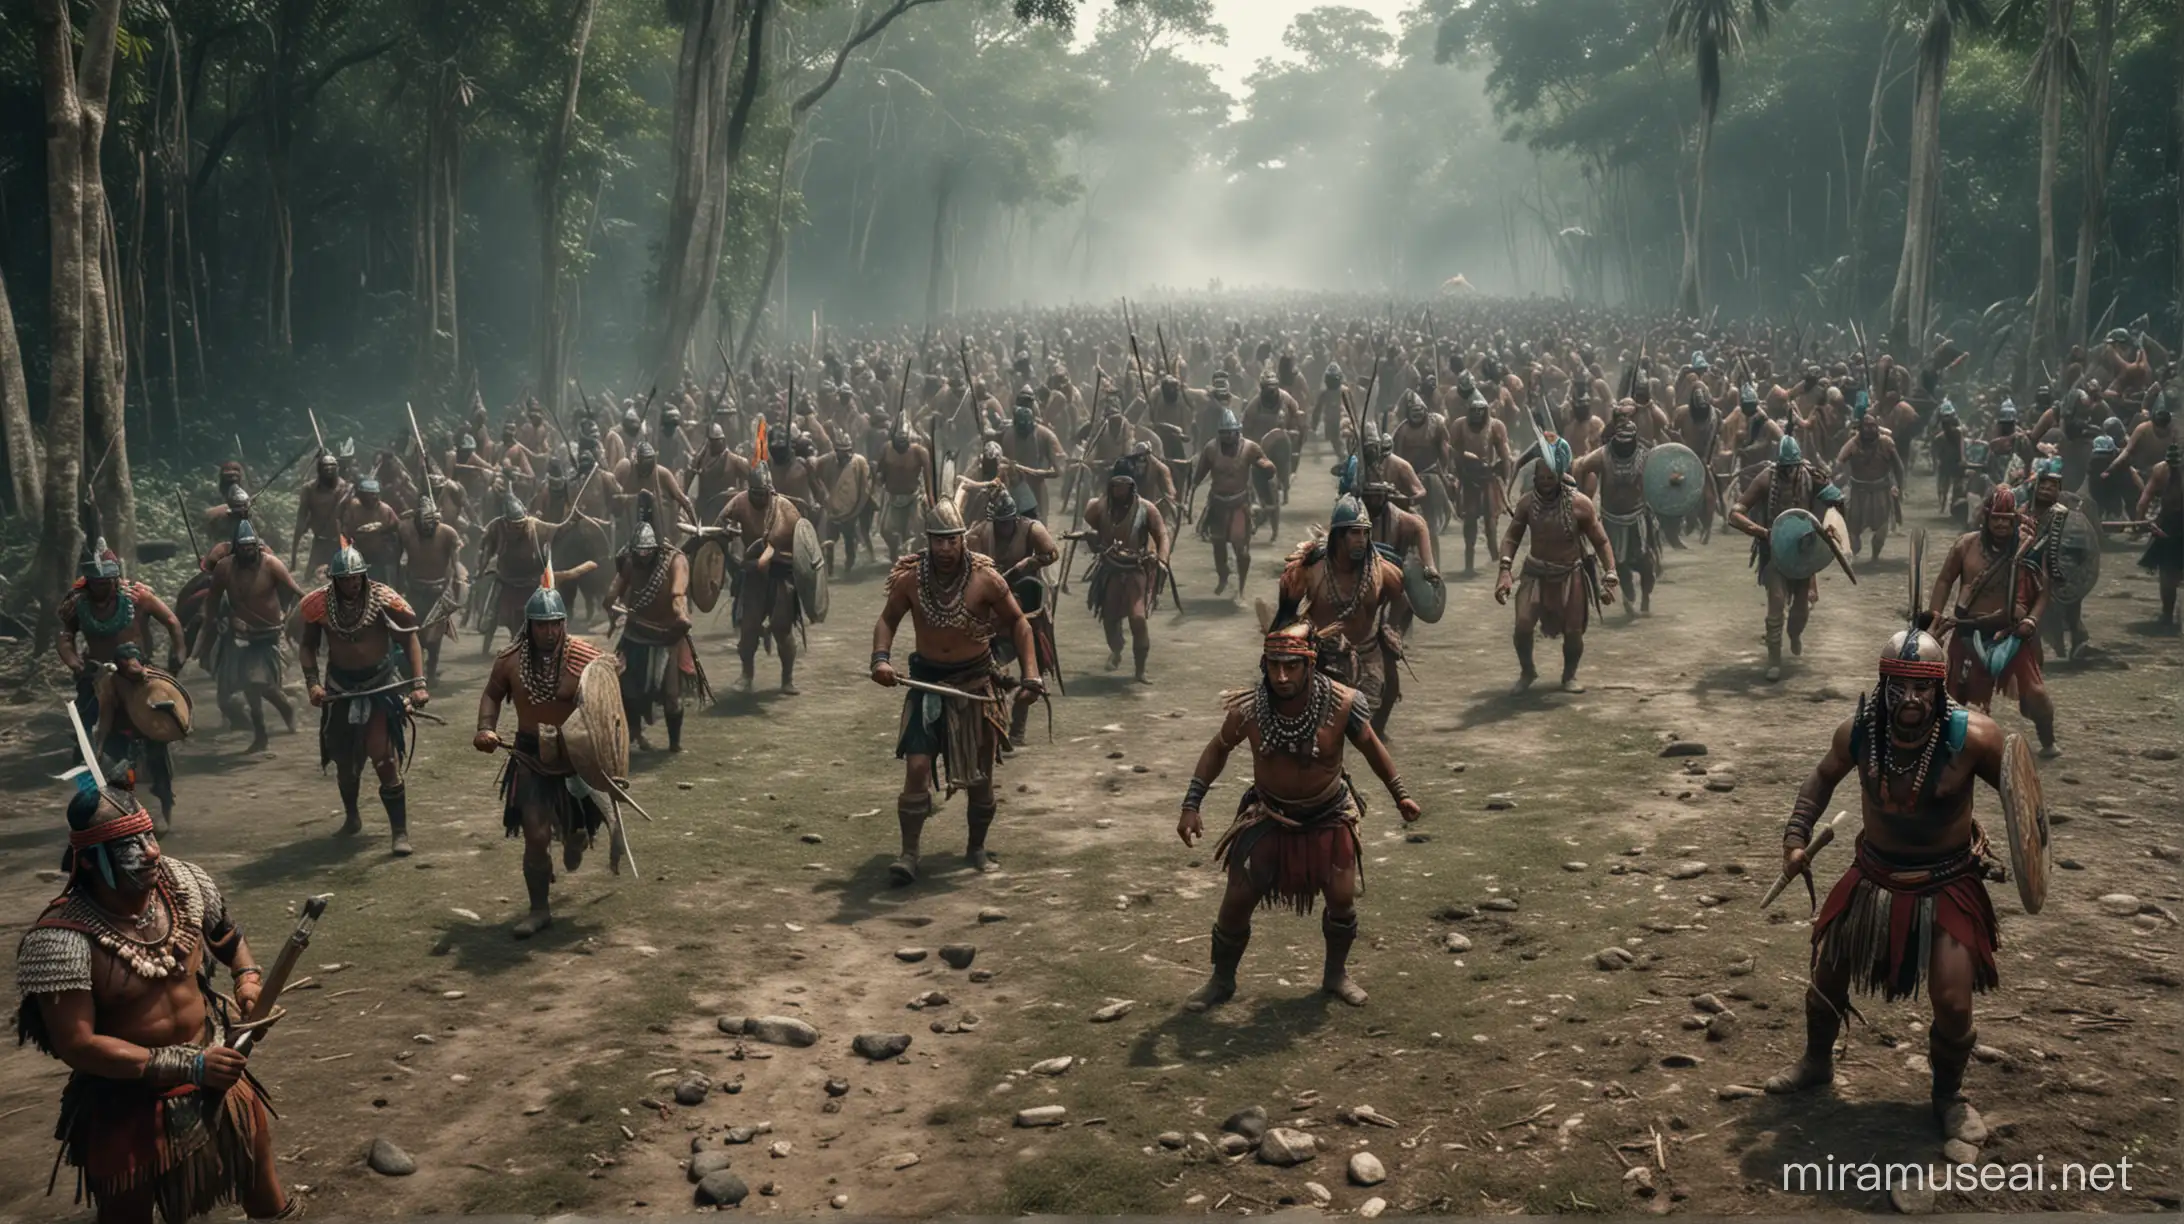 Mayan Tribal Battles Ancient Conflict in 6K Resolution